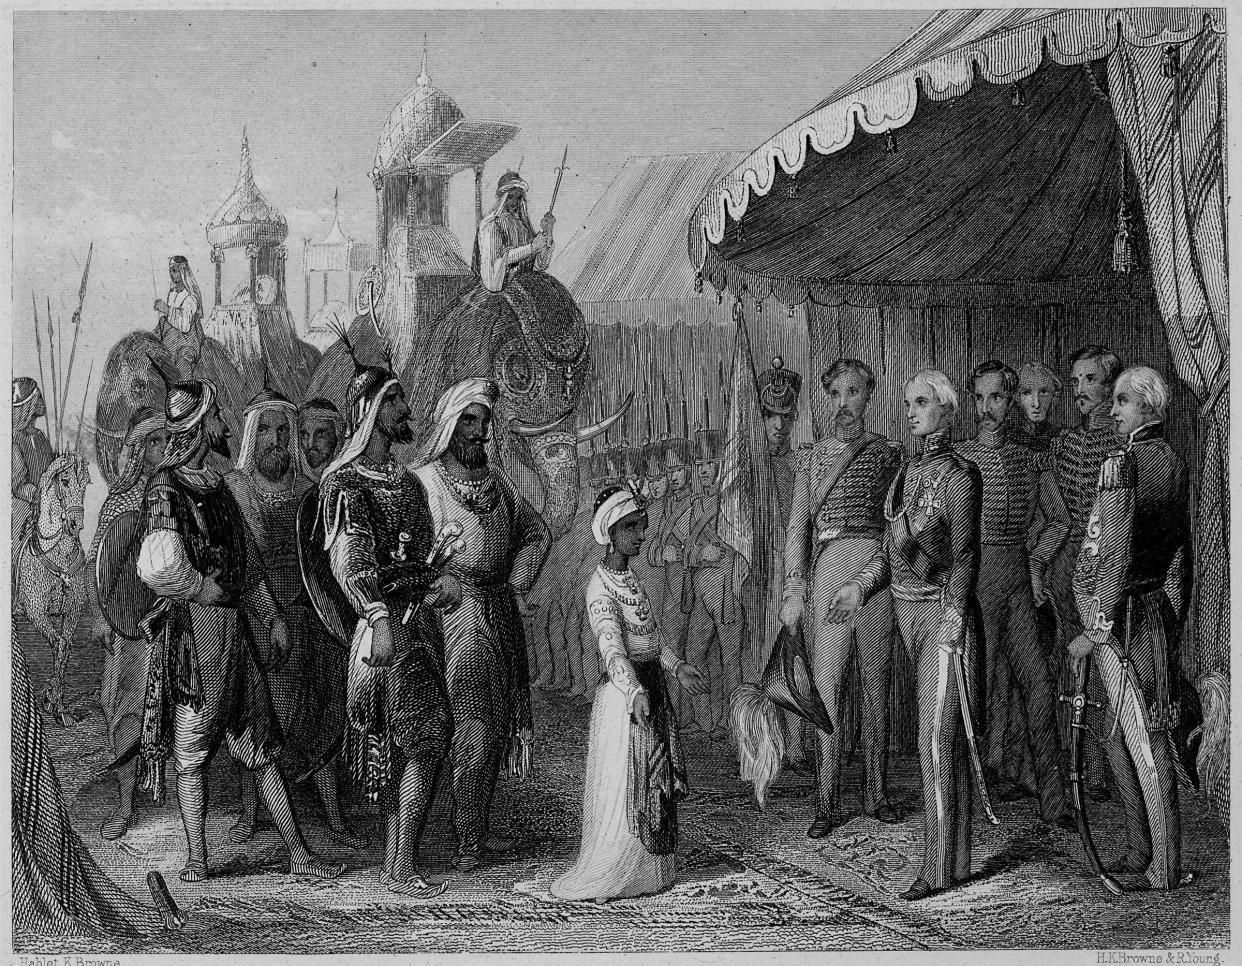 The submission of the Maharajah Duleep Singh to Sir Henry Hardinge as the battle of Sobraon ends the 1st Sikh War in India in 1846